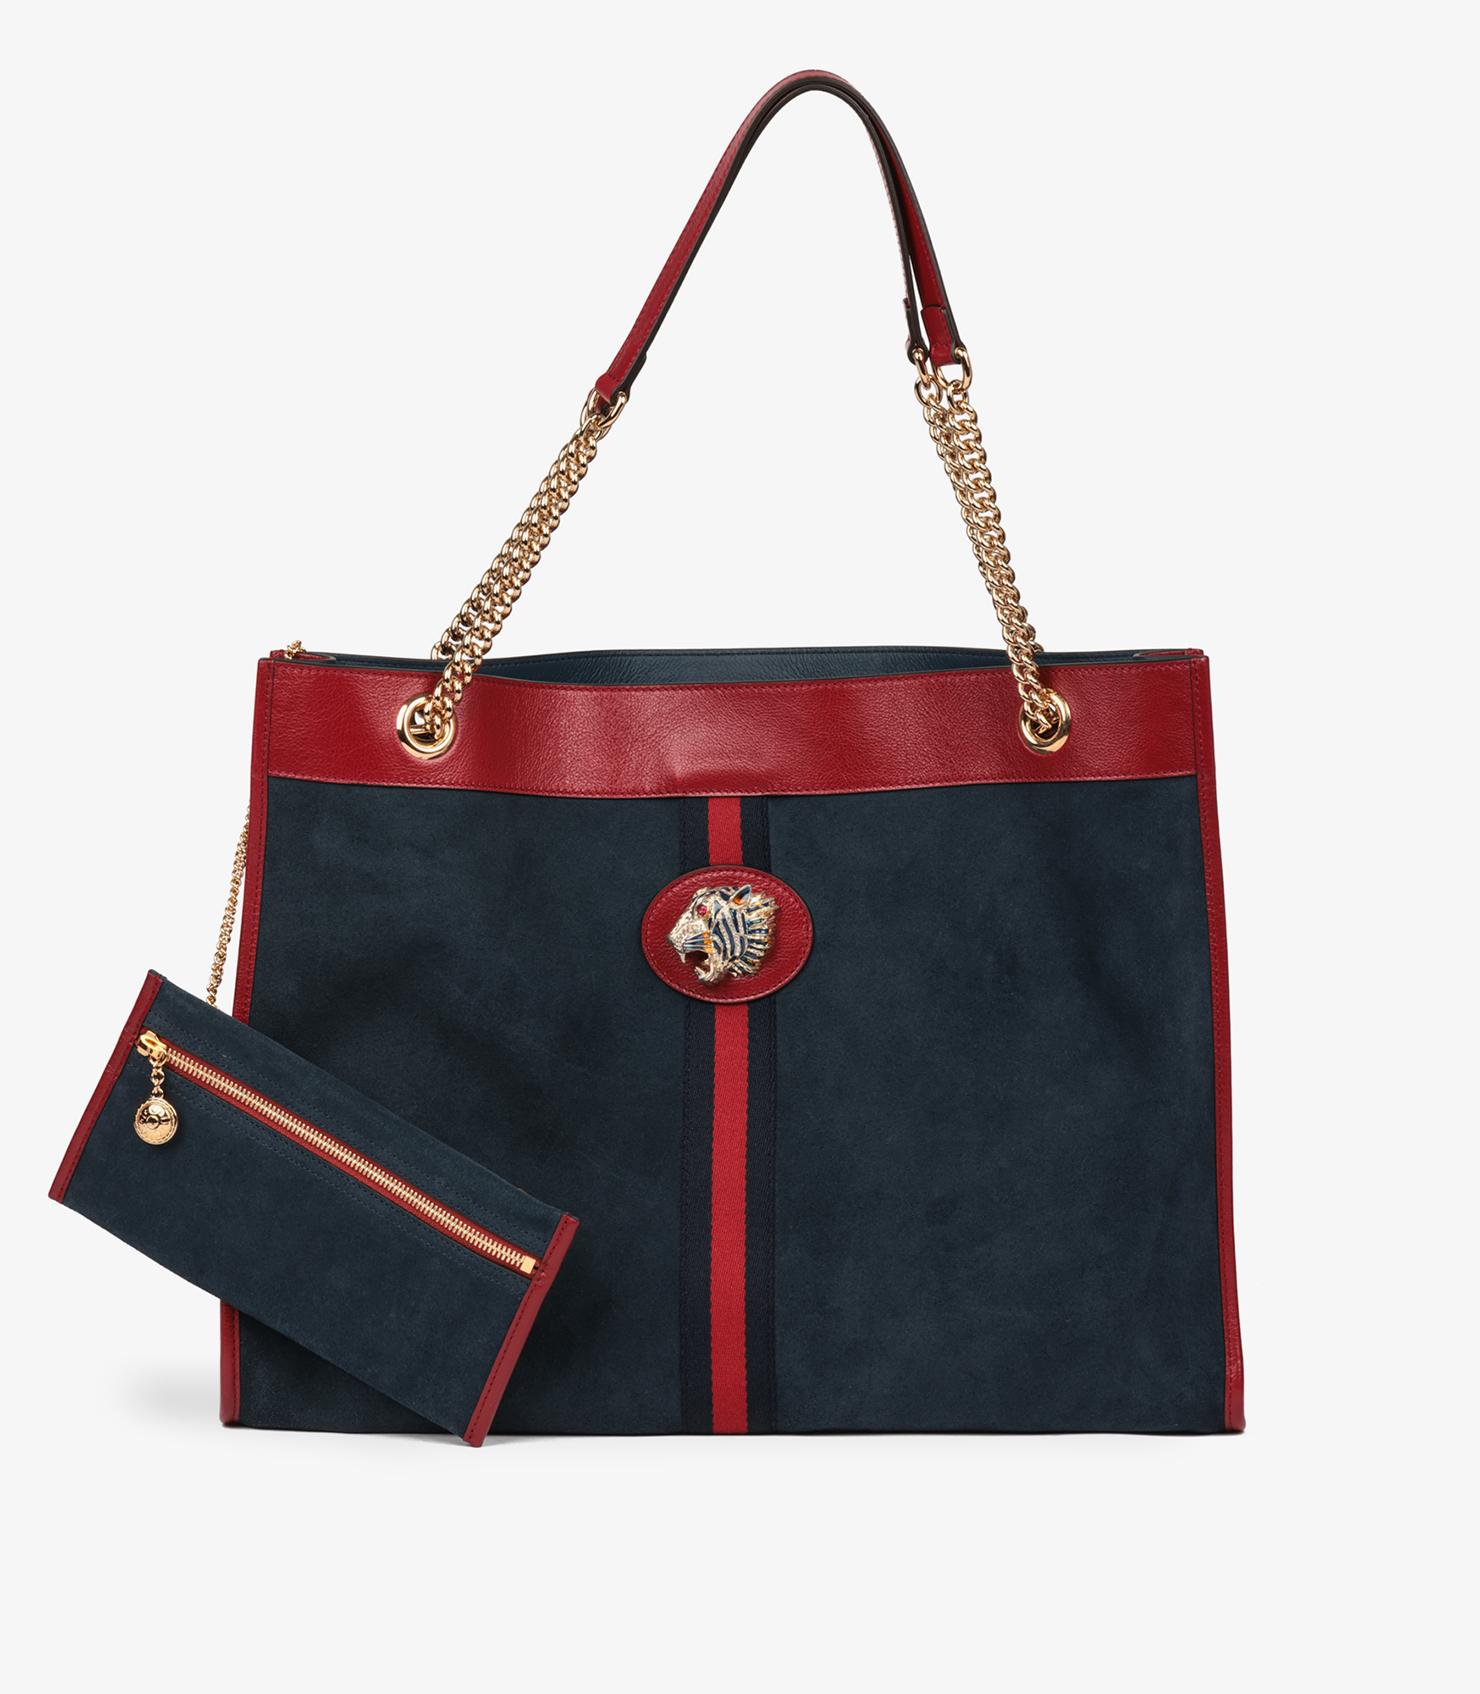 Gucci Red Aged Calfskin Leather & Blue Suede Web Large Rajah Tote

Brand- Gucci
Model- Rajah Tote
Product Type- Shoulder, Tote
Serial Number- 537219 562600
Age- Circa 2020
Accompanied By- Gucci Dust Bag, Care Booklet
Colour- Red, Blue
Hardware- Gold